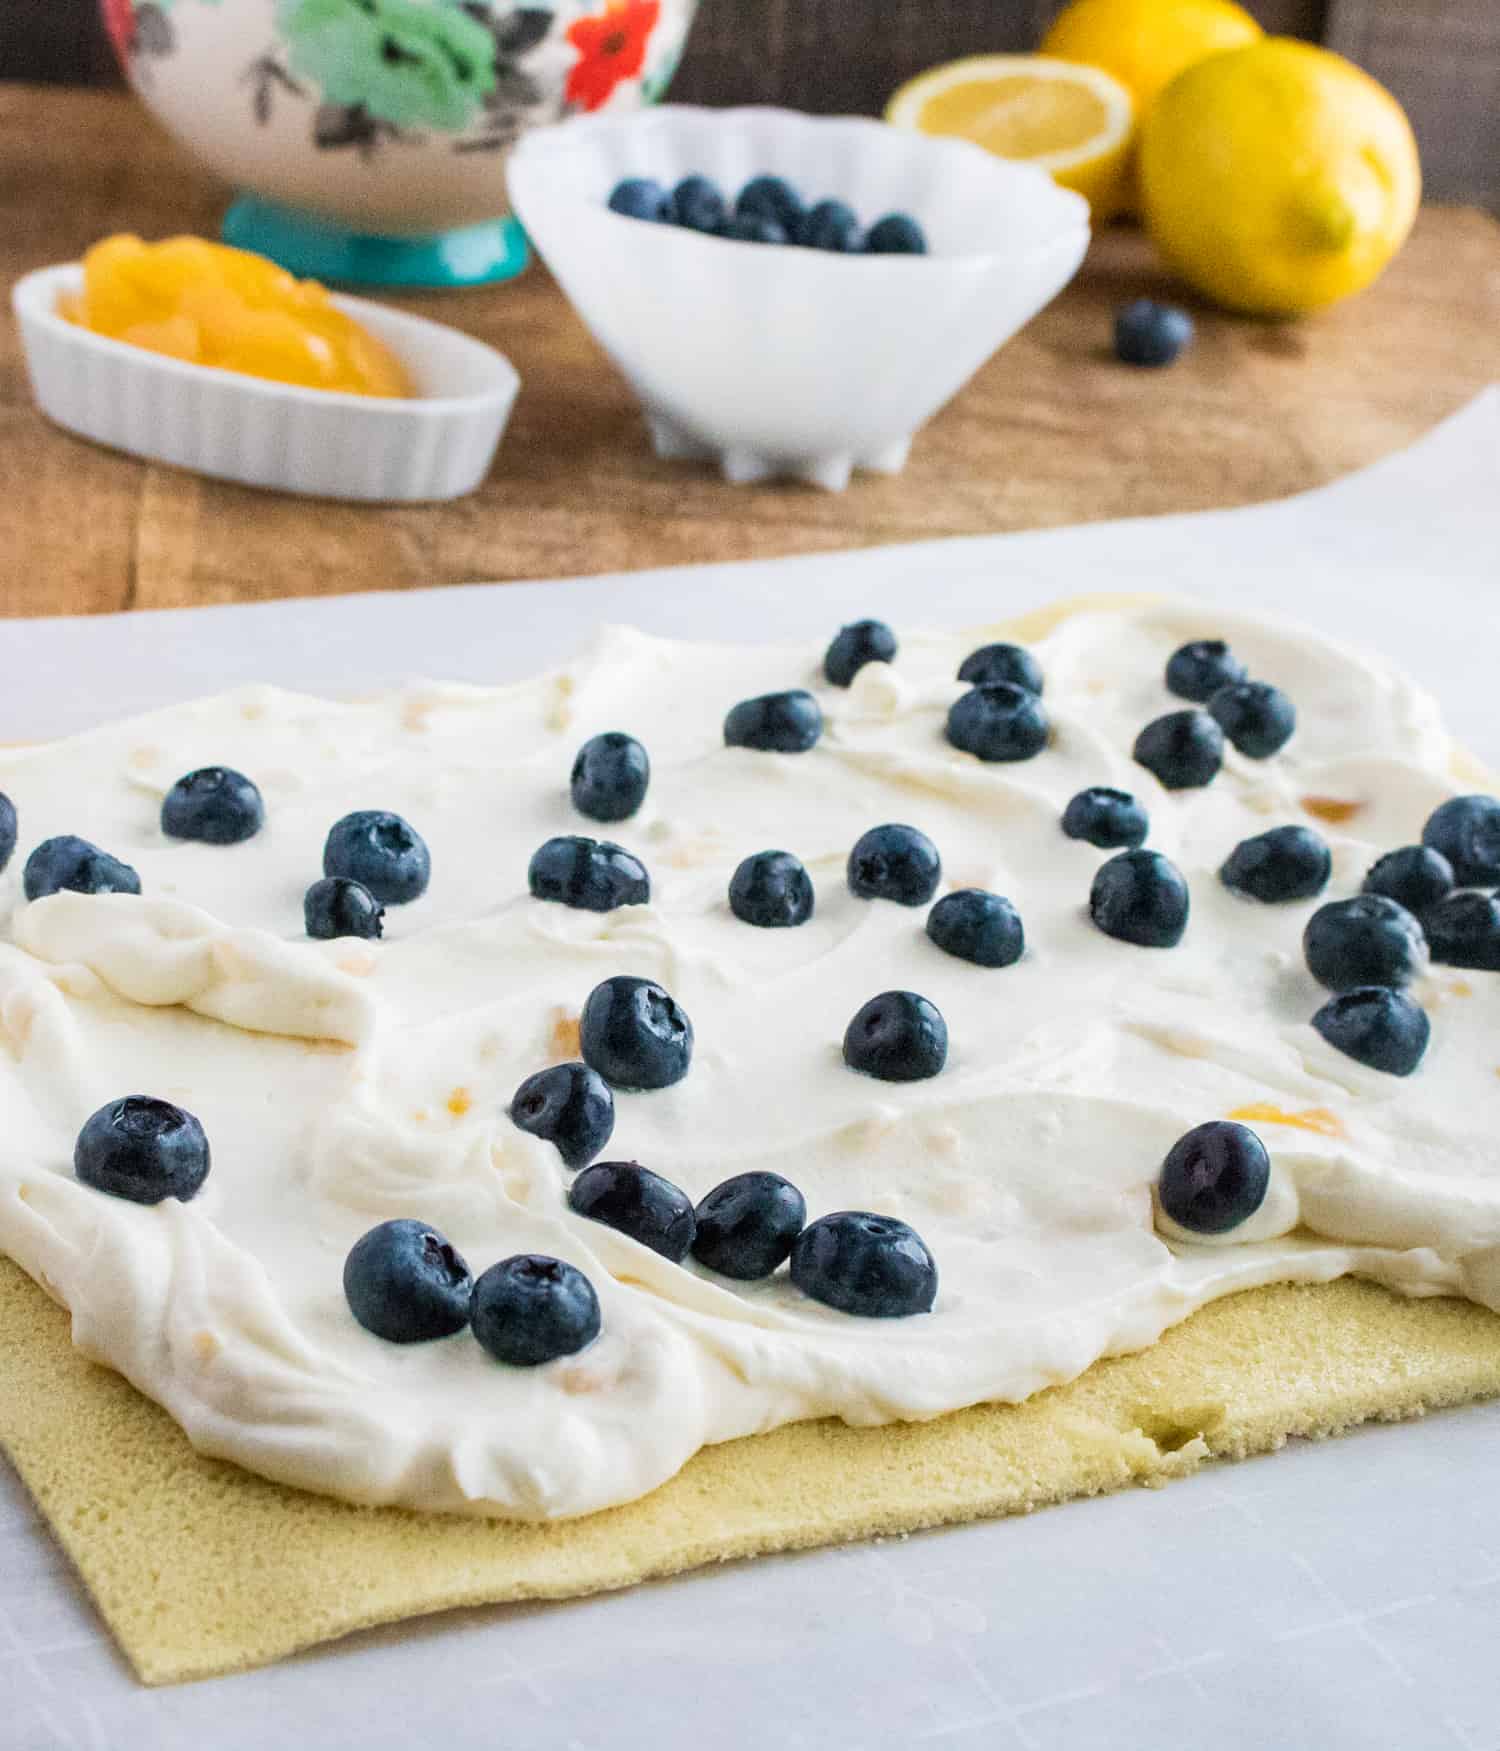 cake roll dough rolled flat covered in lemon cream and sprinkled with blueberries